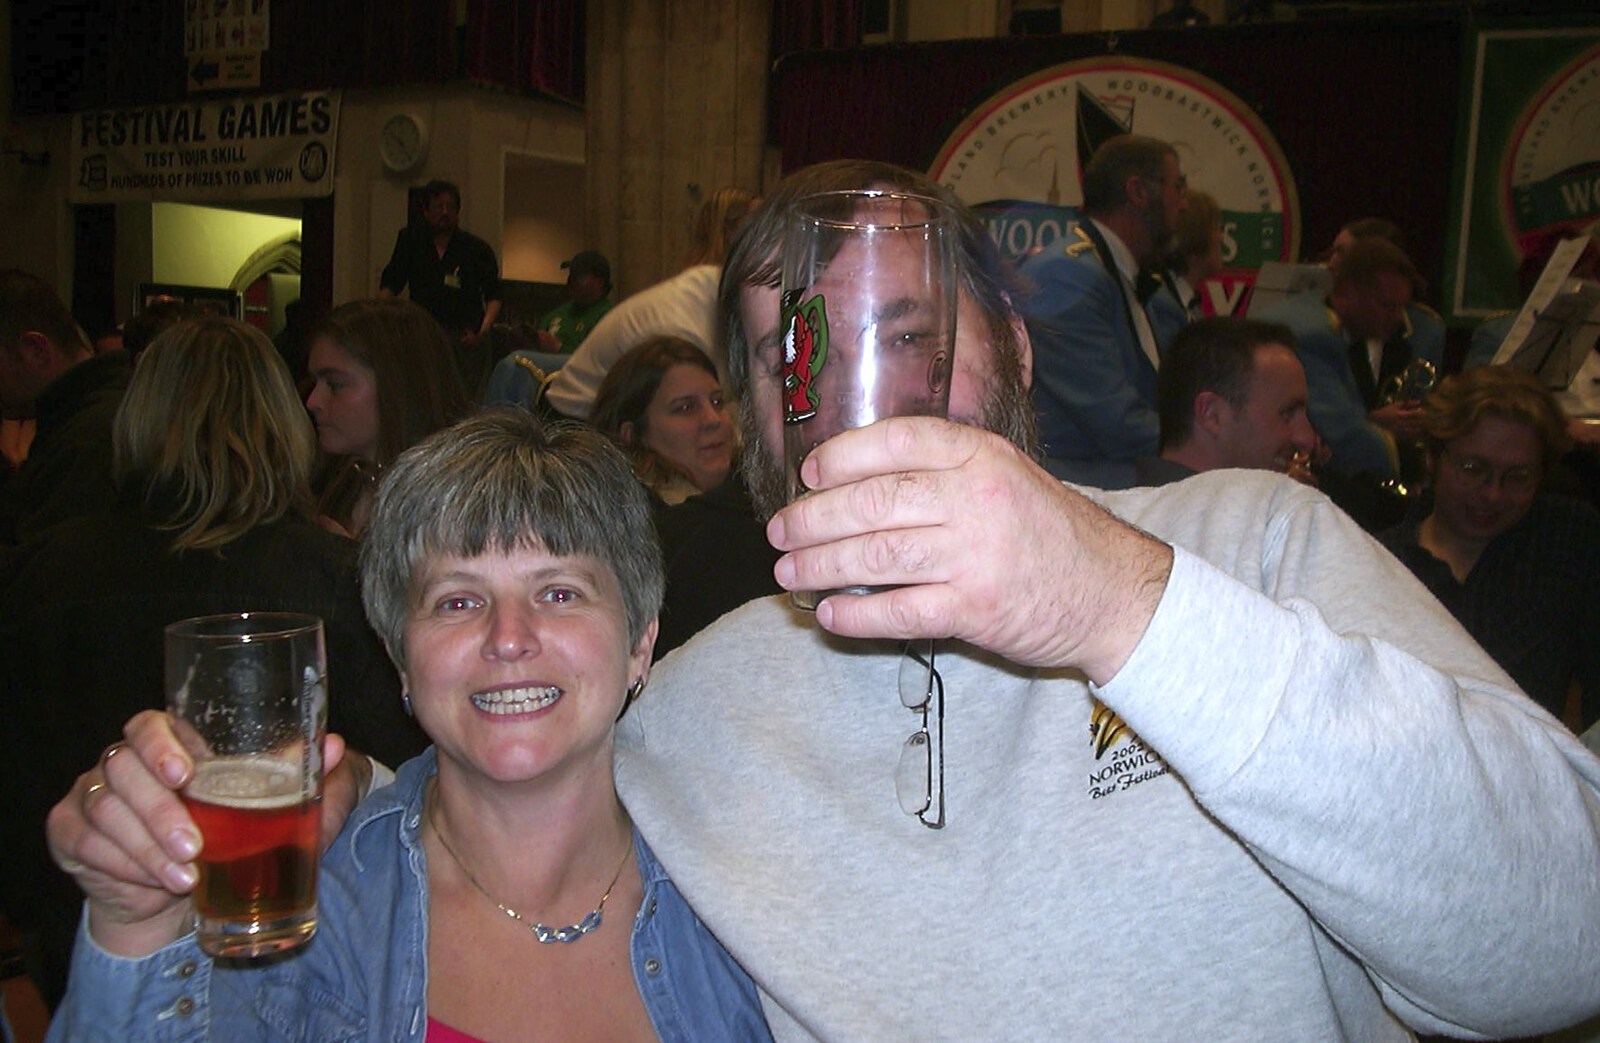 Gloria and Gerry, behind a glass from The Brome Swan at the Norwich Beer Festival, St. Andrew's Hall, Norwich - 29th October 2003